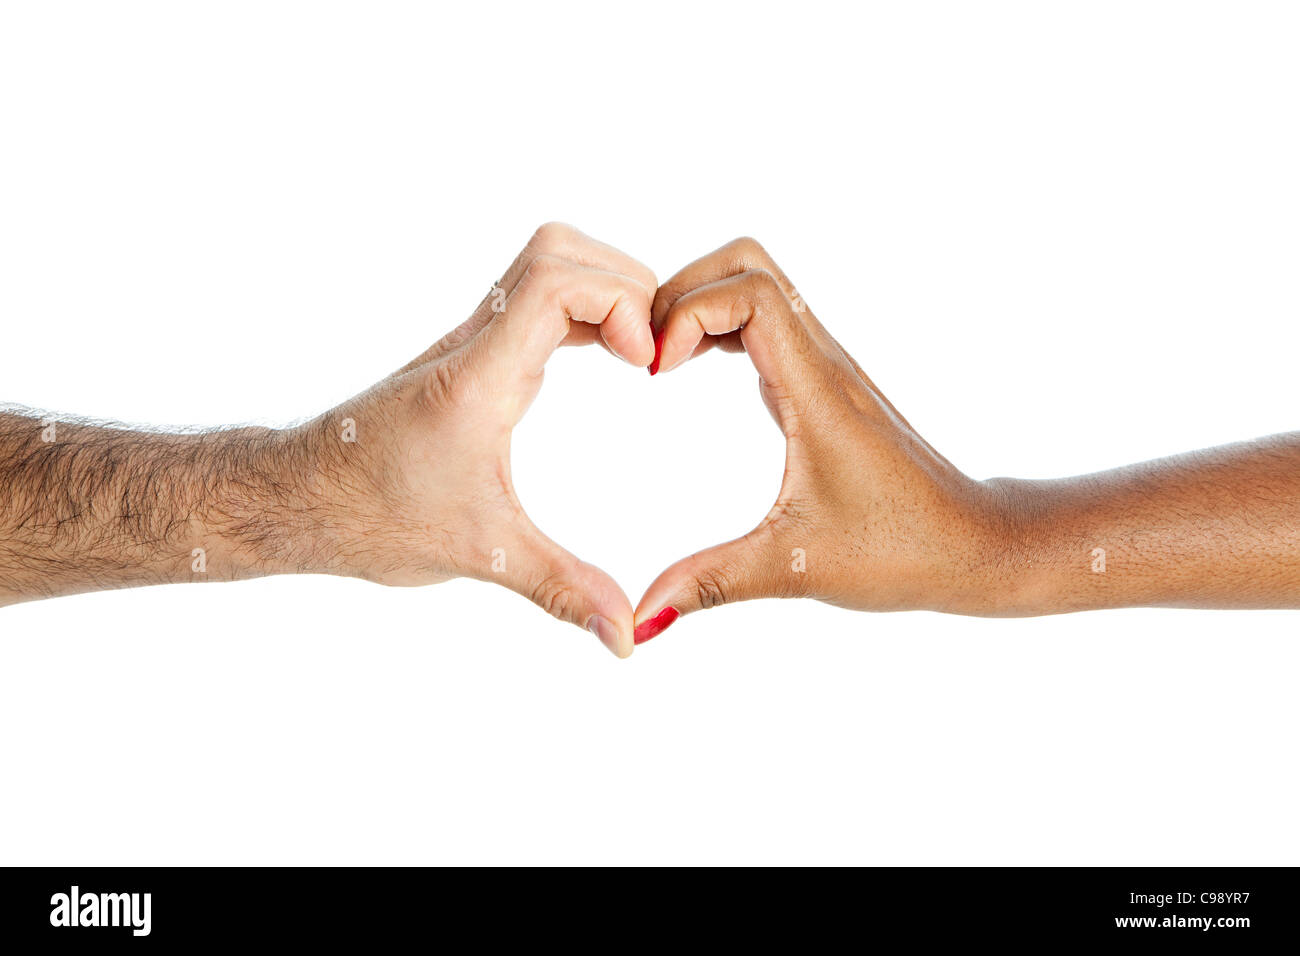 Mixed race couple making heart shape with hands Stock Photo